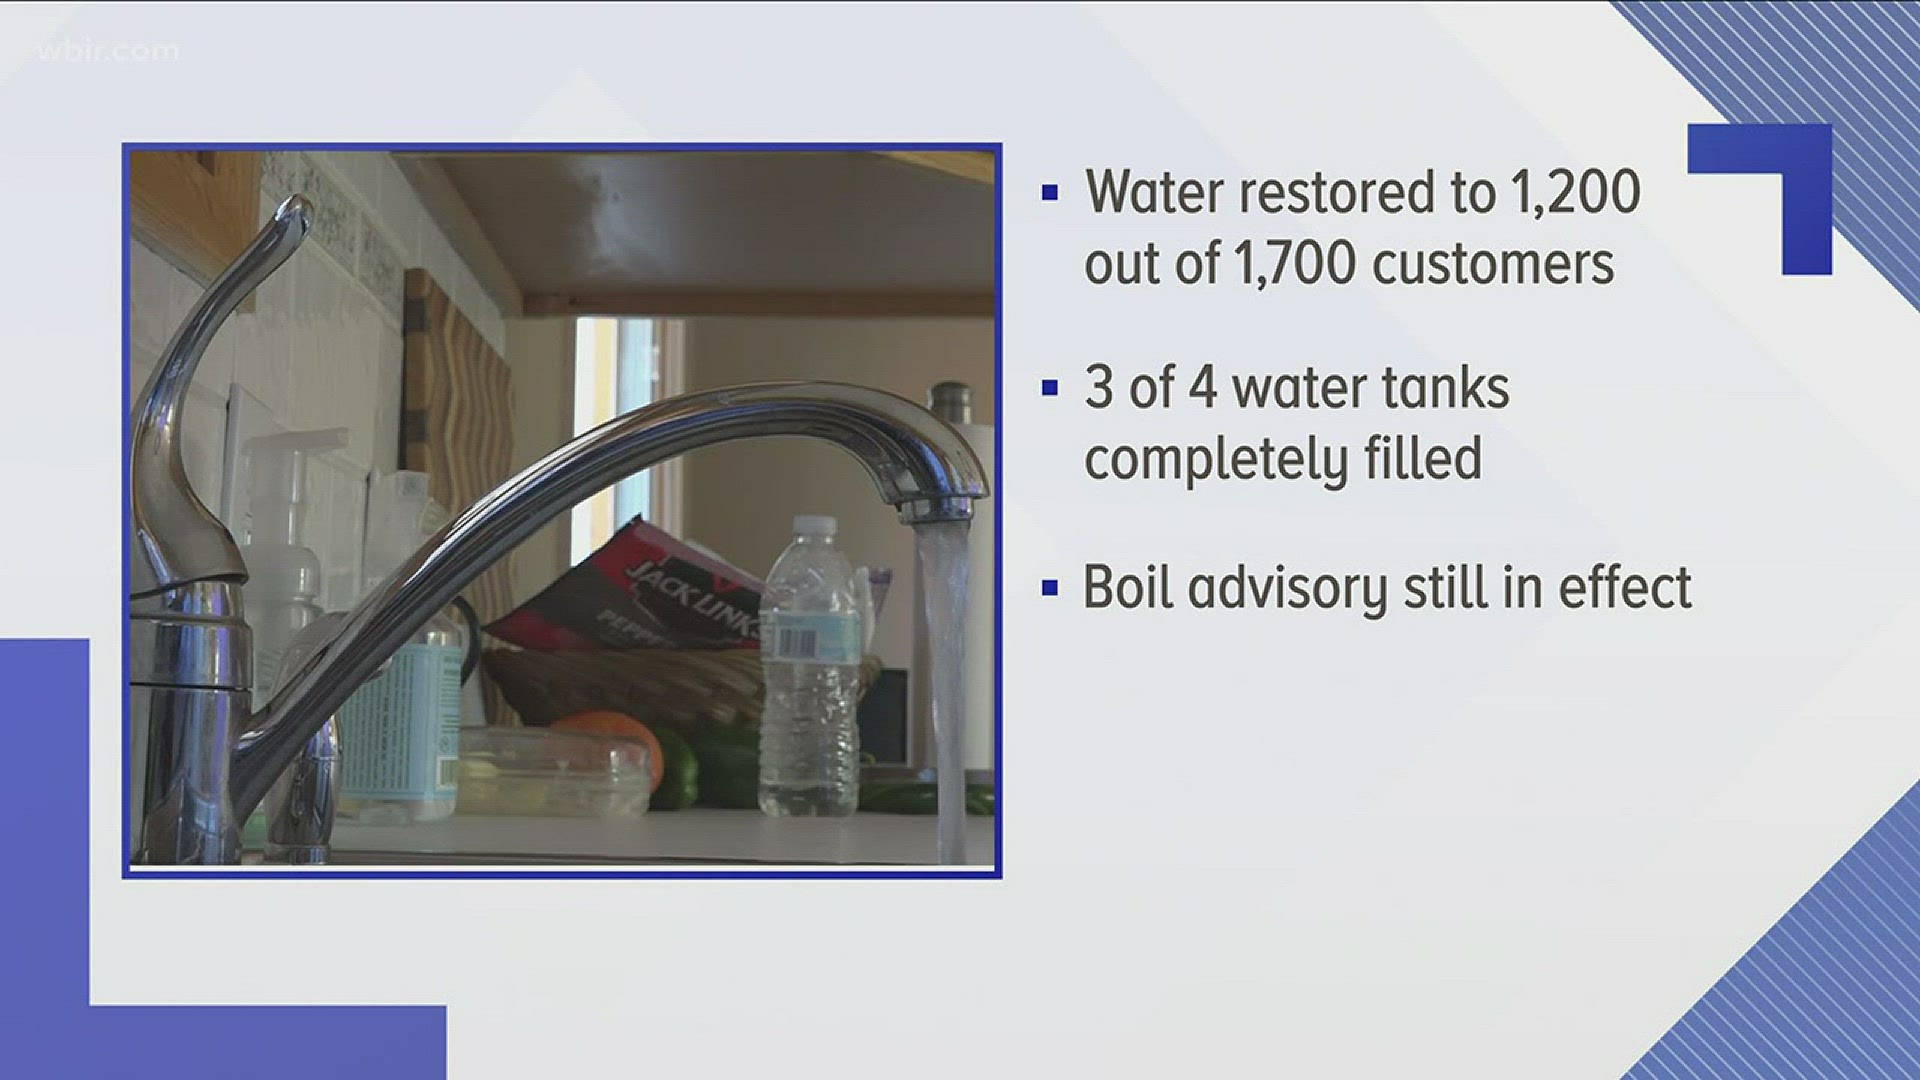 Water has been restored to 1,200 of 1,700 customers in Jellico as of 7 p.m. Sunday.